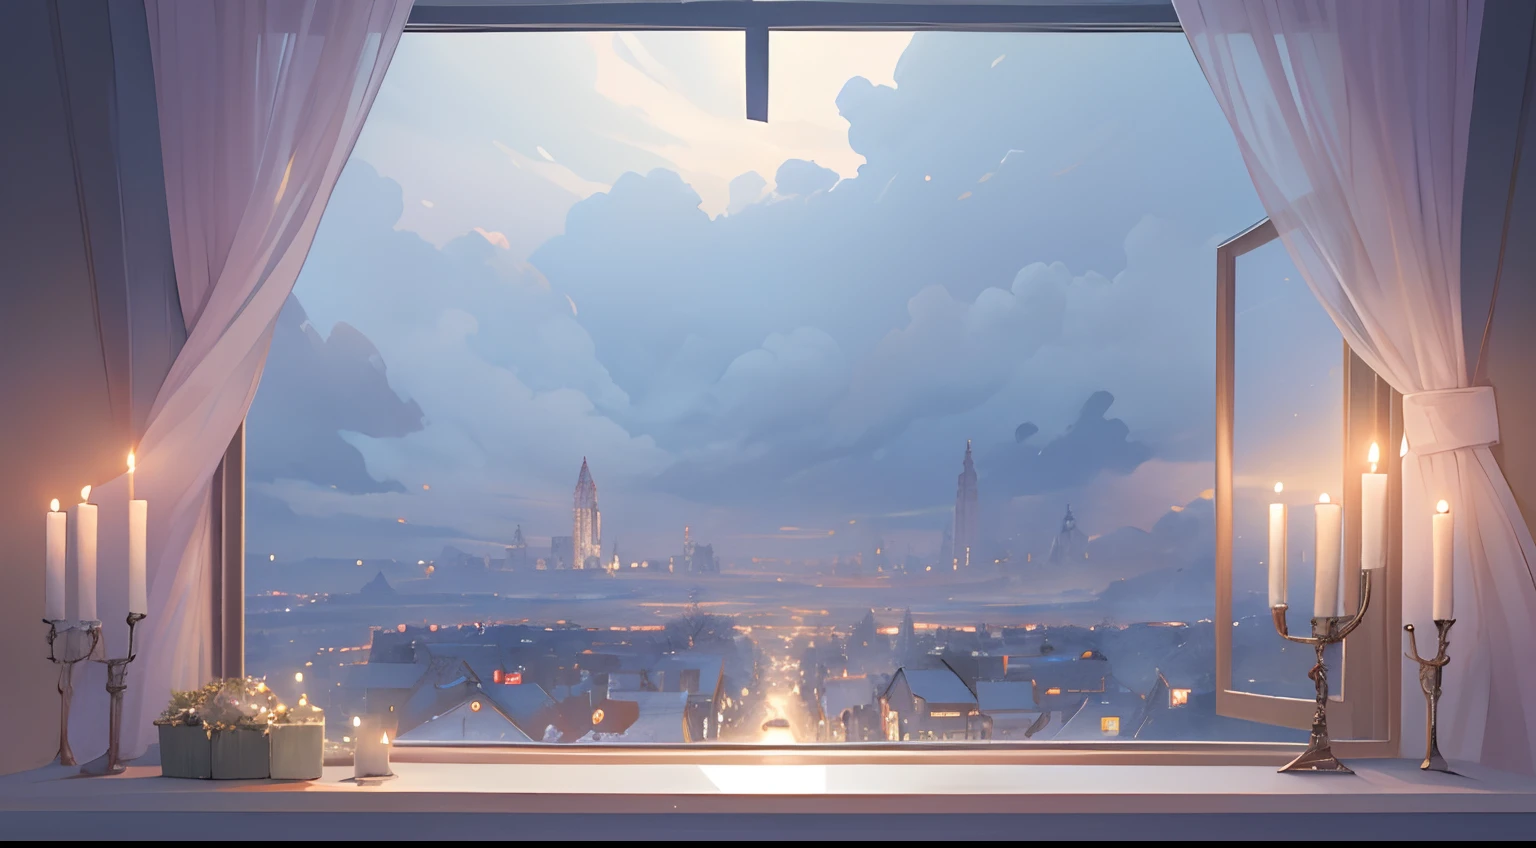 cloudy weather cloudy windowsill illustration winter cloudy landscape landscape with lots of candles in the middle graphic top quality landscape